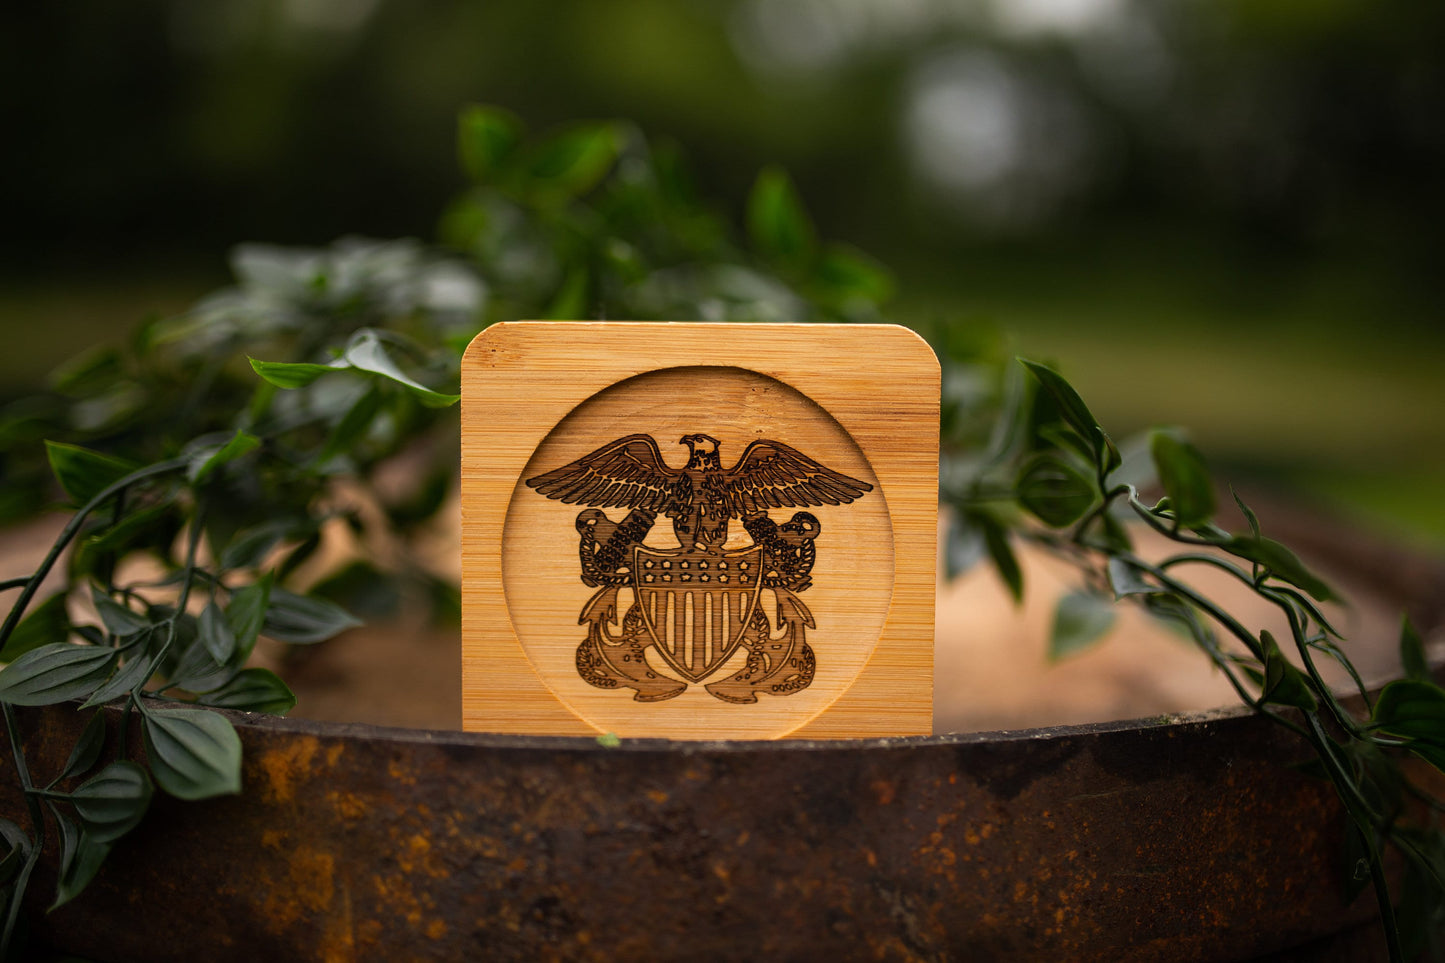 Navy Officer Crest Laser Engraved Bamboo Coasters!  Set of 4, great gift for commissioning or special occasions